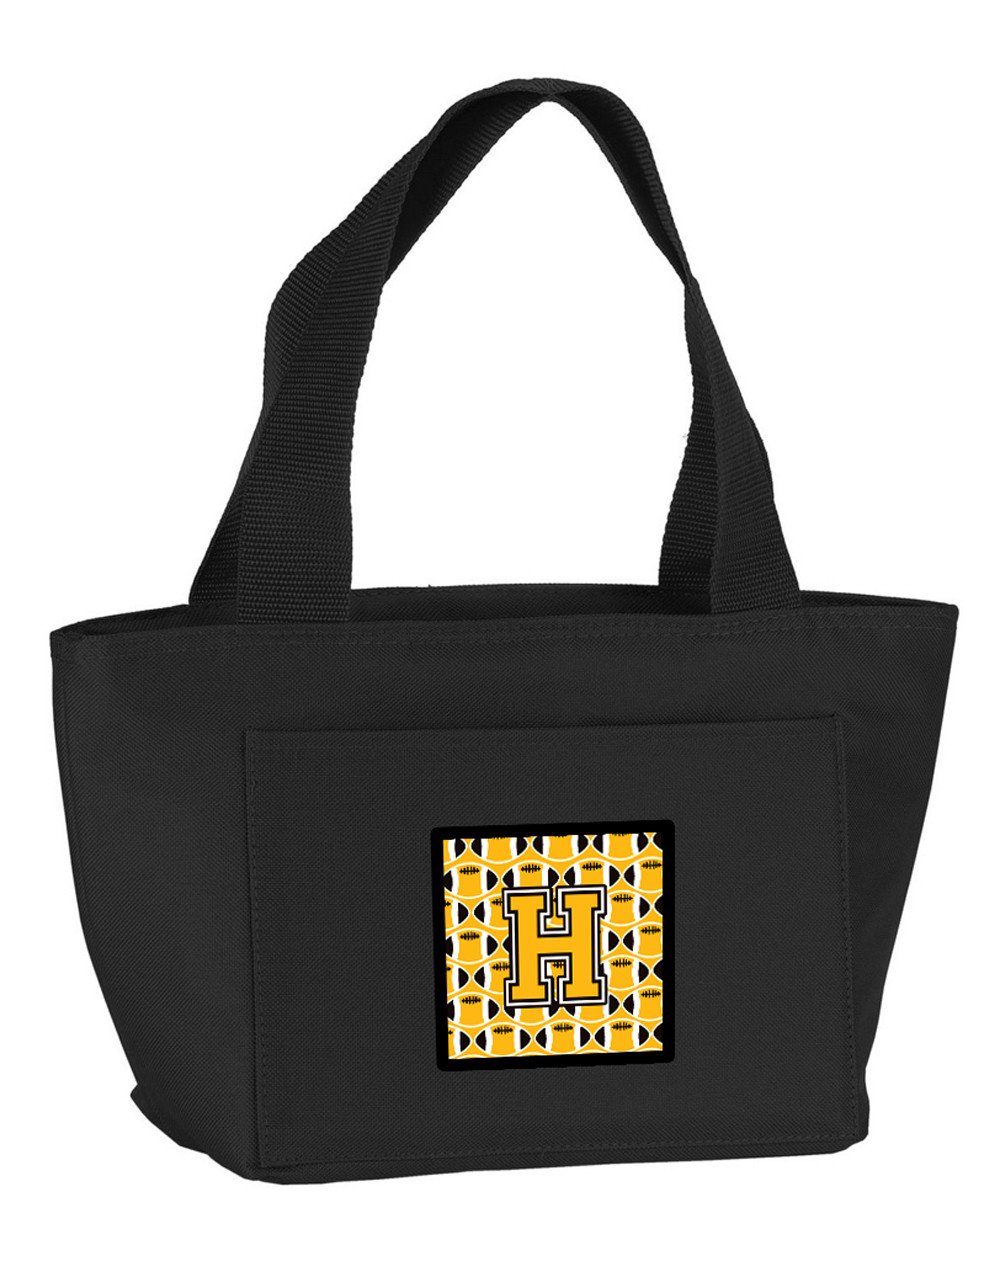 Letter H Football Black, Old Gold and White Lunch Bag CJ1080-HBK-8808 by Caroline's Treasures